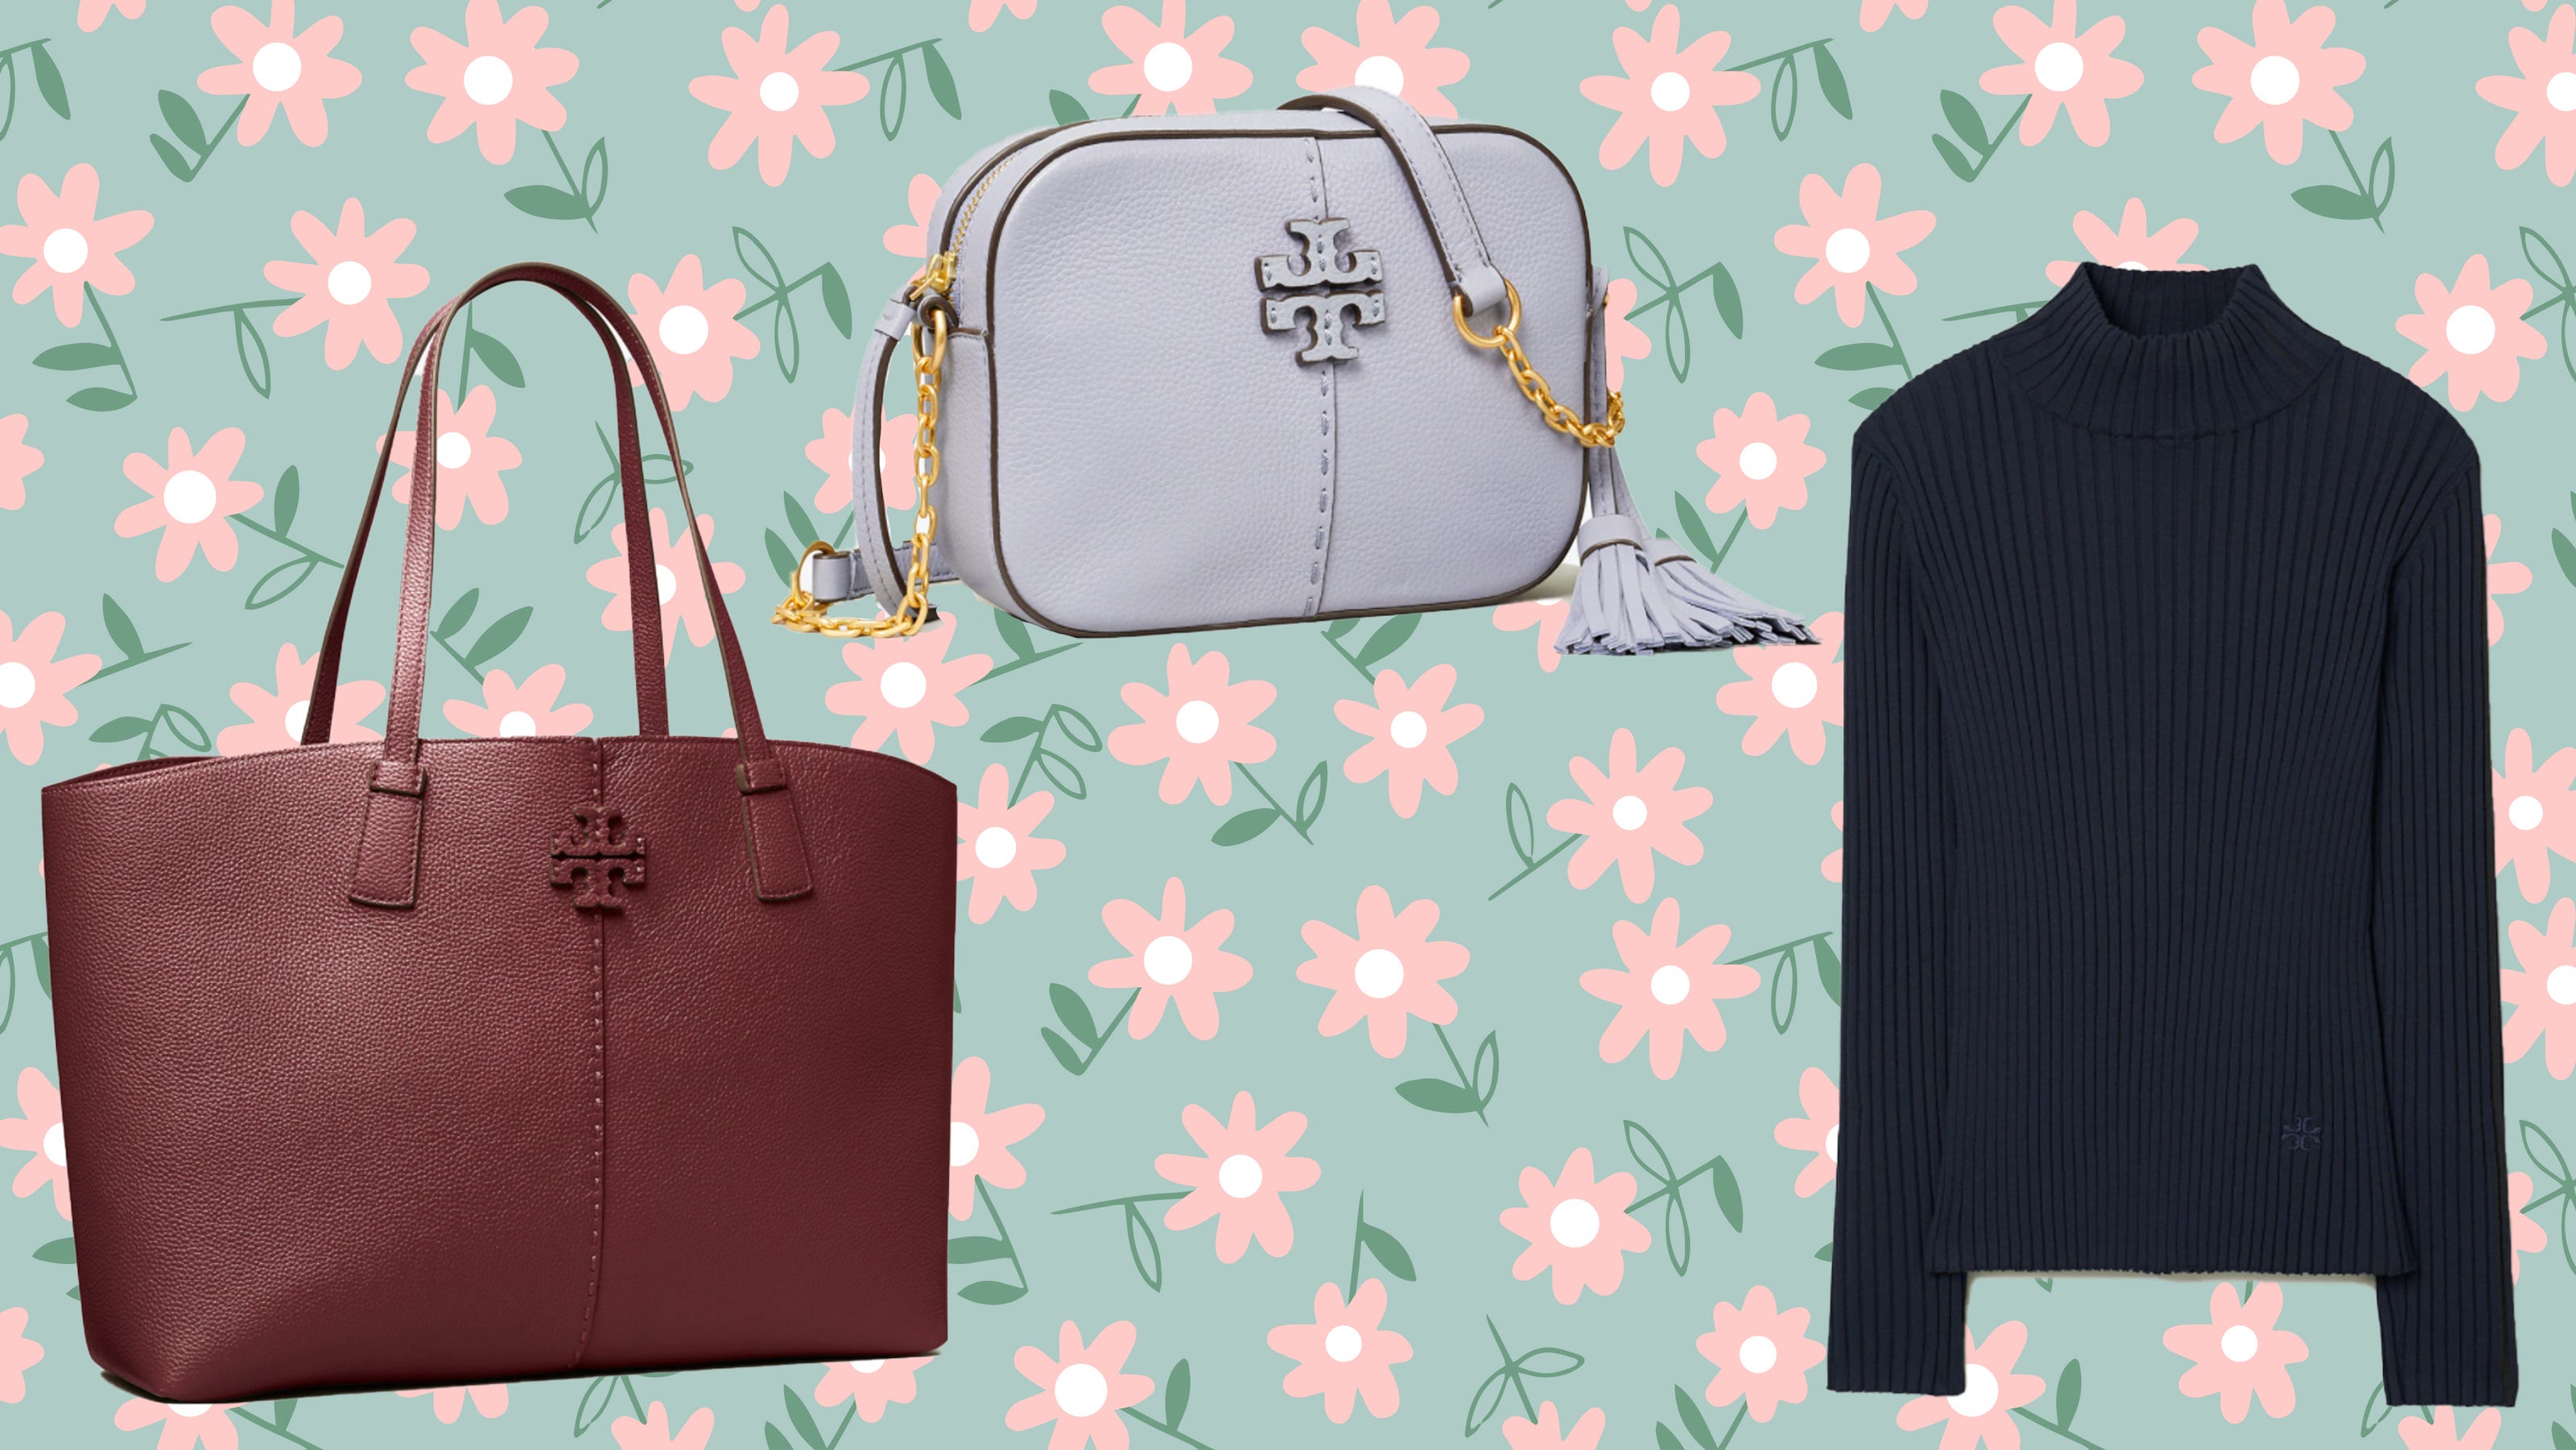 Tory Burch sale: Shop the store's twice-yearly private sale now